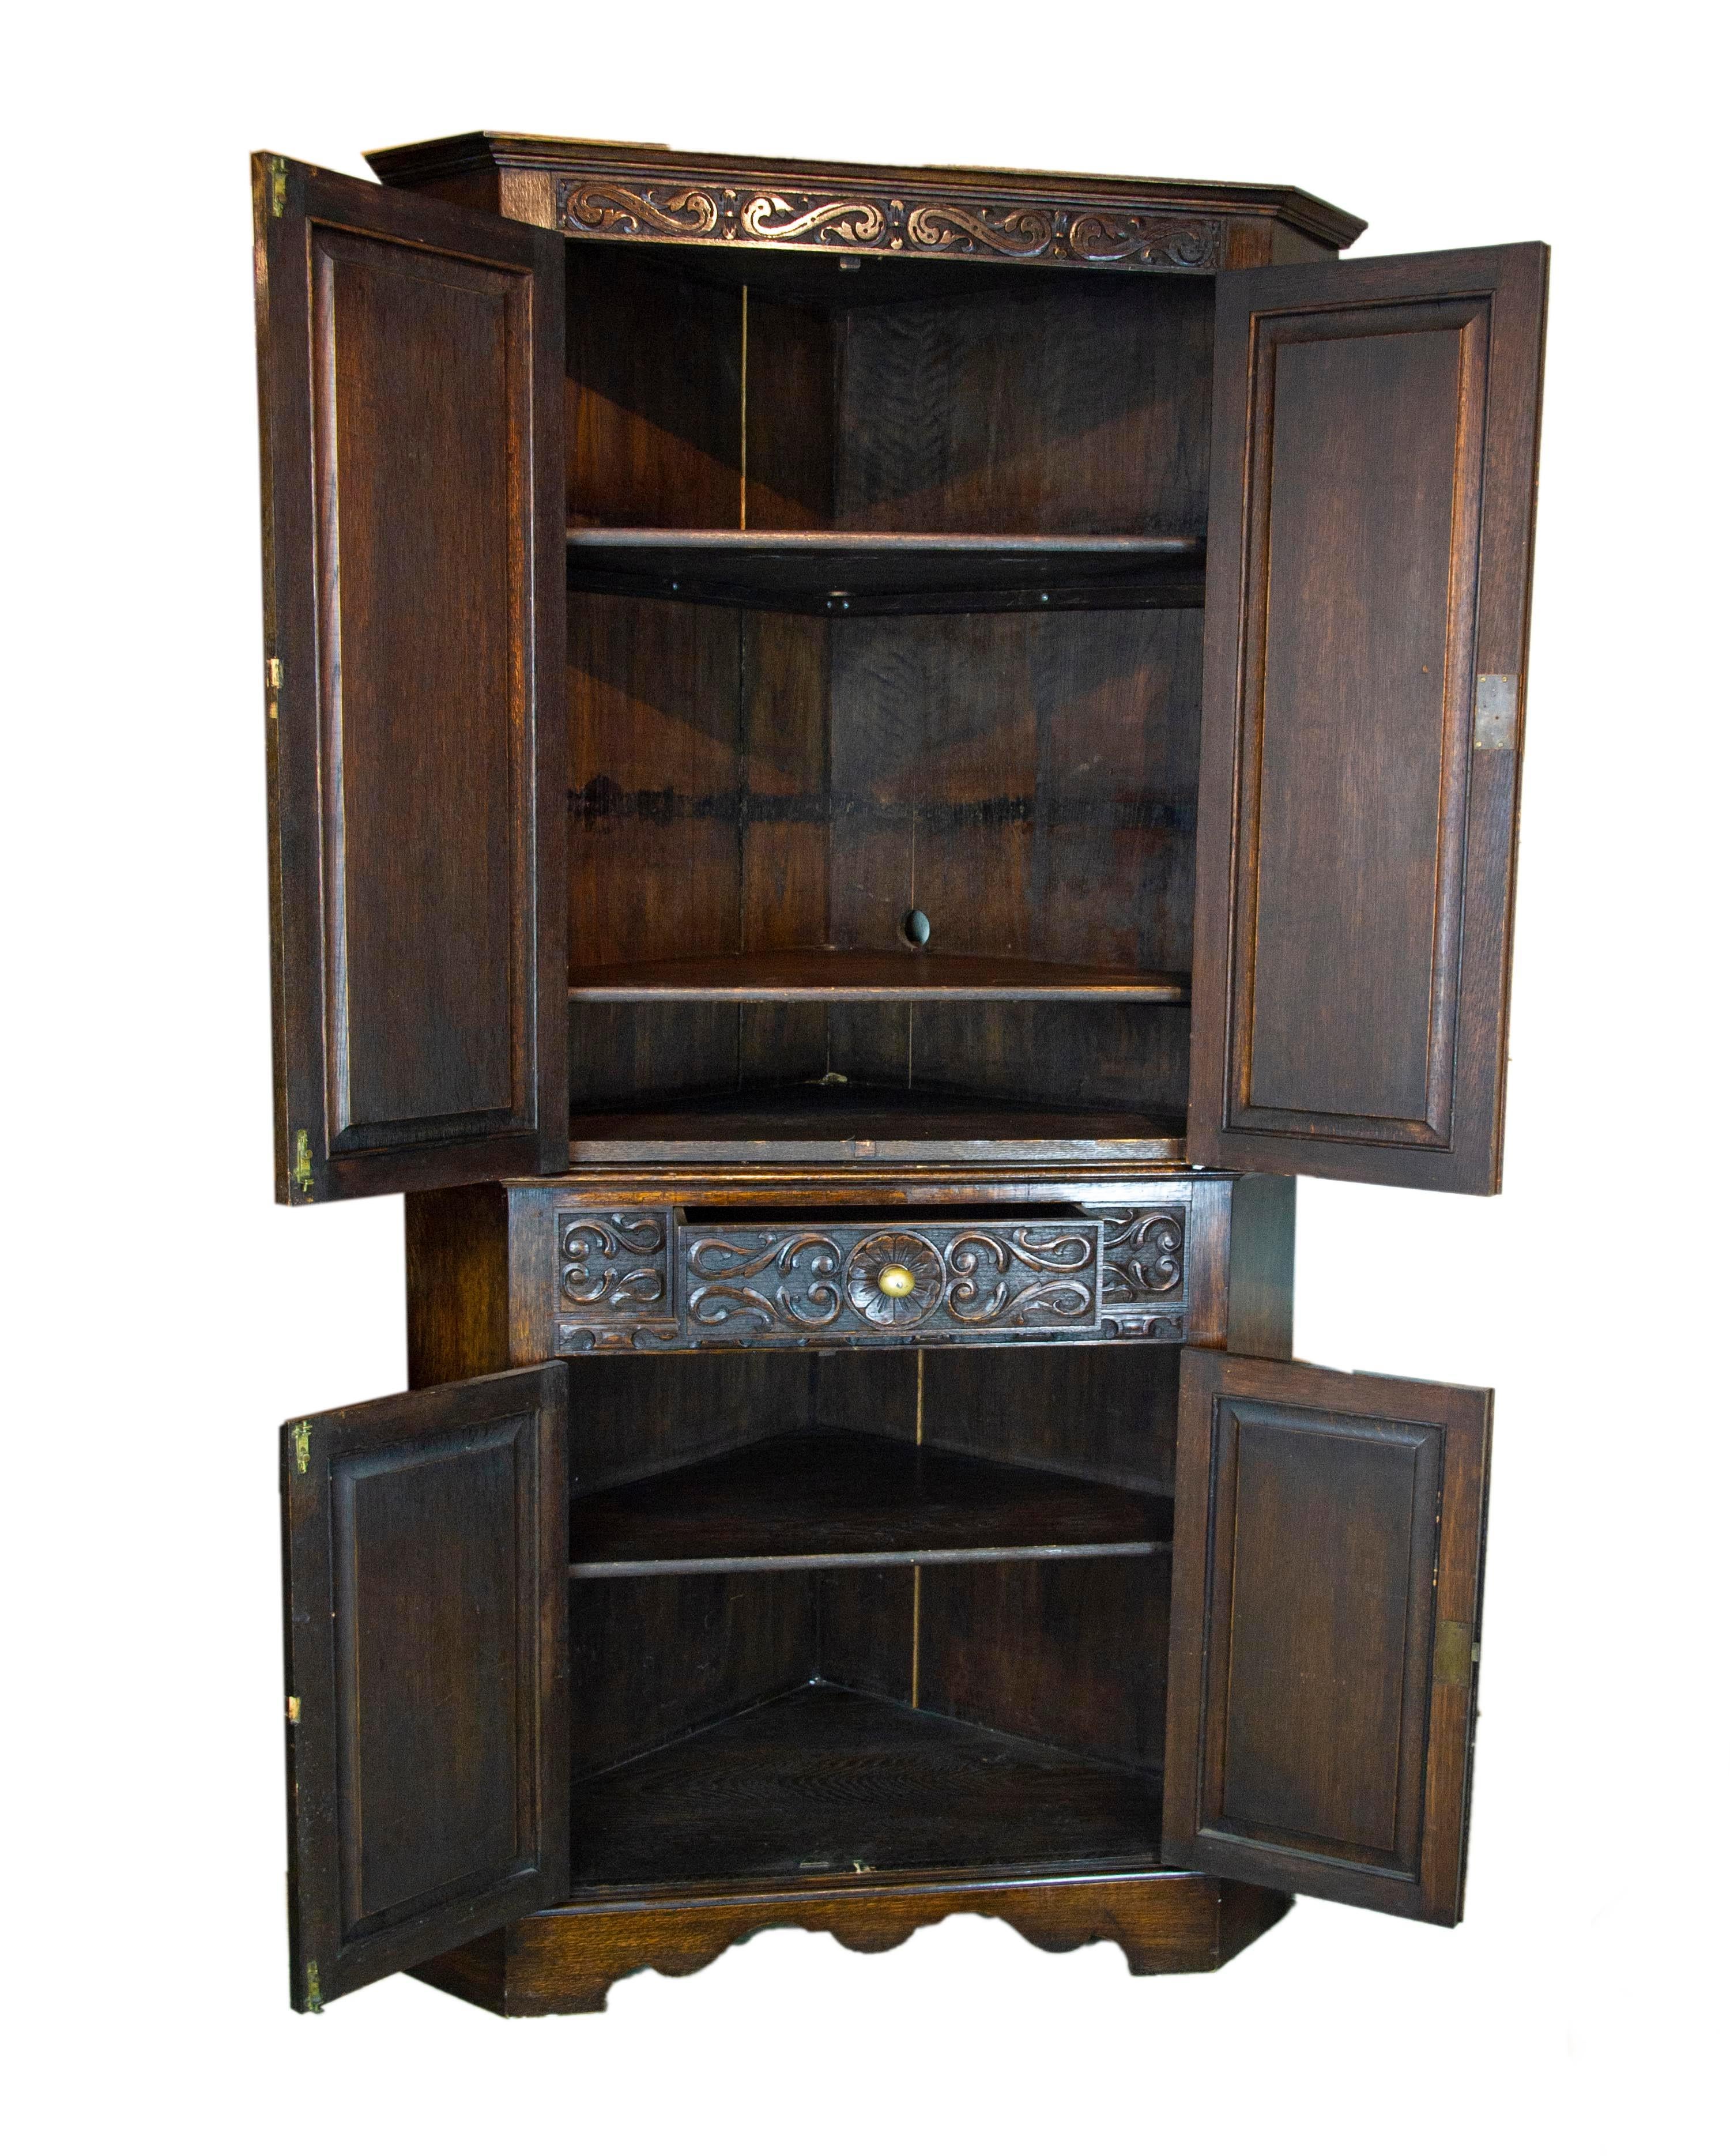 Antique corner cabinet, entryway decor, carved cabinet, Antique Furniture, Scotland 1950, B1497 

Scotland 1950
Solid oak construction
Original finish
Carved detailed cornice above
Pair of paneled doors below
Open to reveal two oak